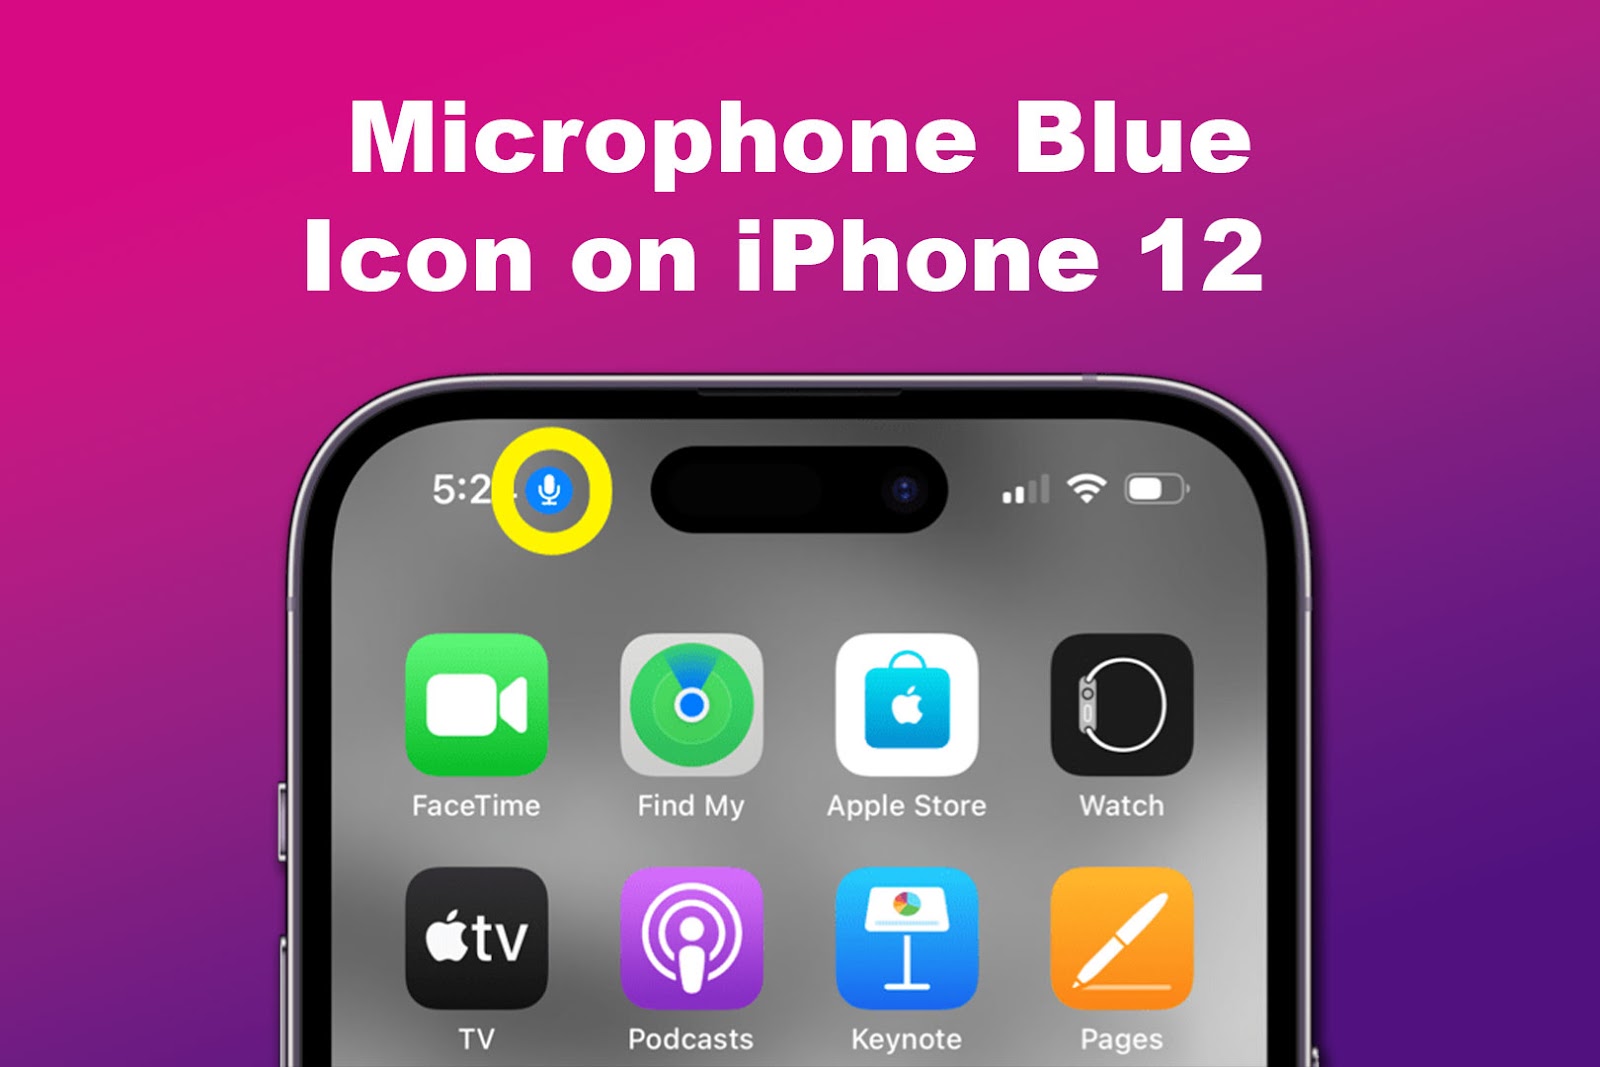 Microphone Blue Icon on iPhone 12